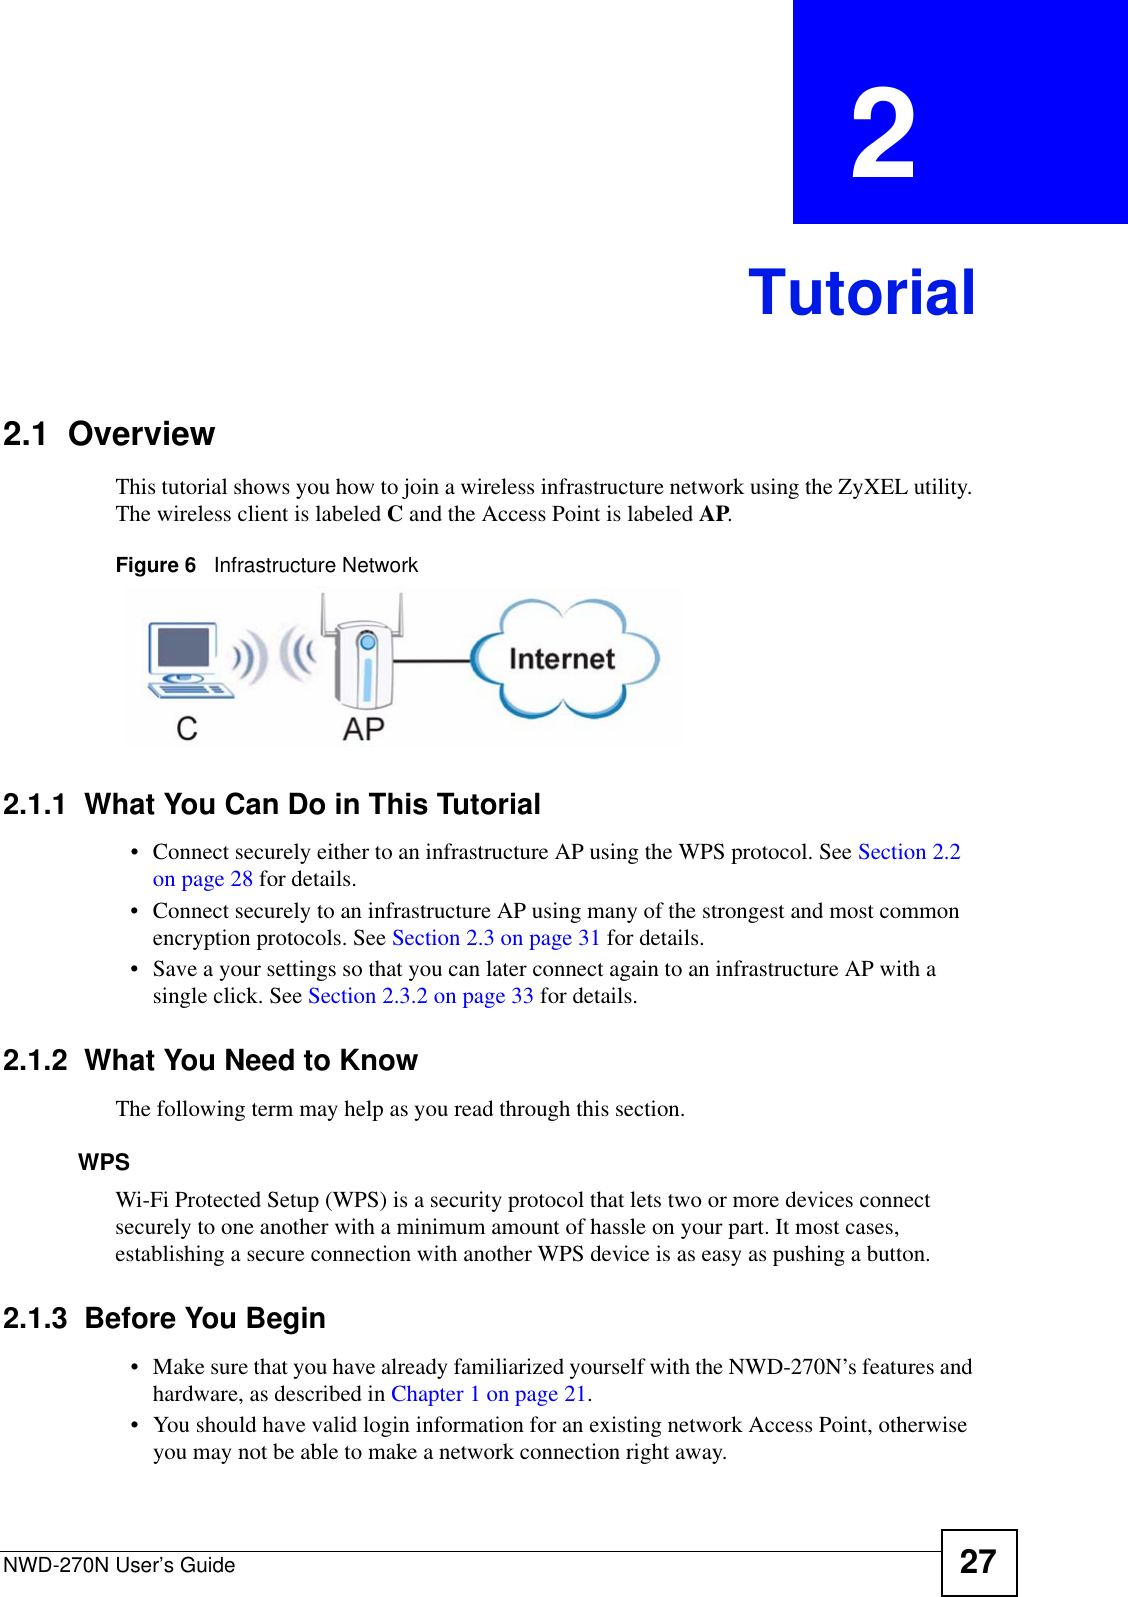 NWD-270N User’s Guide 27CHAPTER  2 Tutorial2.1  OverviewThis tutorial shows you how to join a wireless infrastructure network using the ZyXEL utility. The wireless client is labeled C and the Access Point is labeled AP.Figure 6   Infrastructure Network2.1.1  What You Can Do in This Tutorial• Connect securely either to an infrastructure AP using the WPS protocol. See Section 2.2 on page 28 for details.• Connect securely to an infrastructure AP using many of the strongest and most common encryption protocols. See Section 2.3 on page 31 for details.• Save a your settings so that you can later connect again to an infrastructure AP with a single click. See Section 2.3.2 on page 33 for details.2.1.2  What You Need to KnowThe following term may help as you read through this section.WPSWi-Fi Protected Setup (WPS) is a security protocol that lets two or more devices connect securely to one another with a minimum amount of hassle on your part. It most cases, establishing a secure connection with another WPS device is as easy as pushing a button.2.1.3  Before You Begin• Make sure that you have already familiarized yourself with the NWD-270N’s features and hardware, as described in Chapter 1 on page 21.• You should have valid login information for an existing network Access Point, otherwise you may not be able to make a network connection right away.